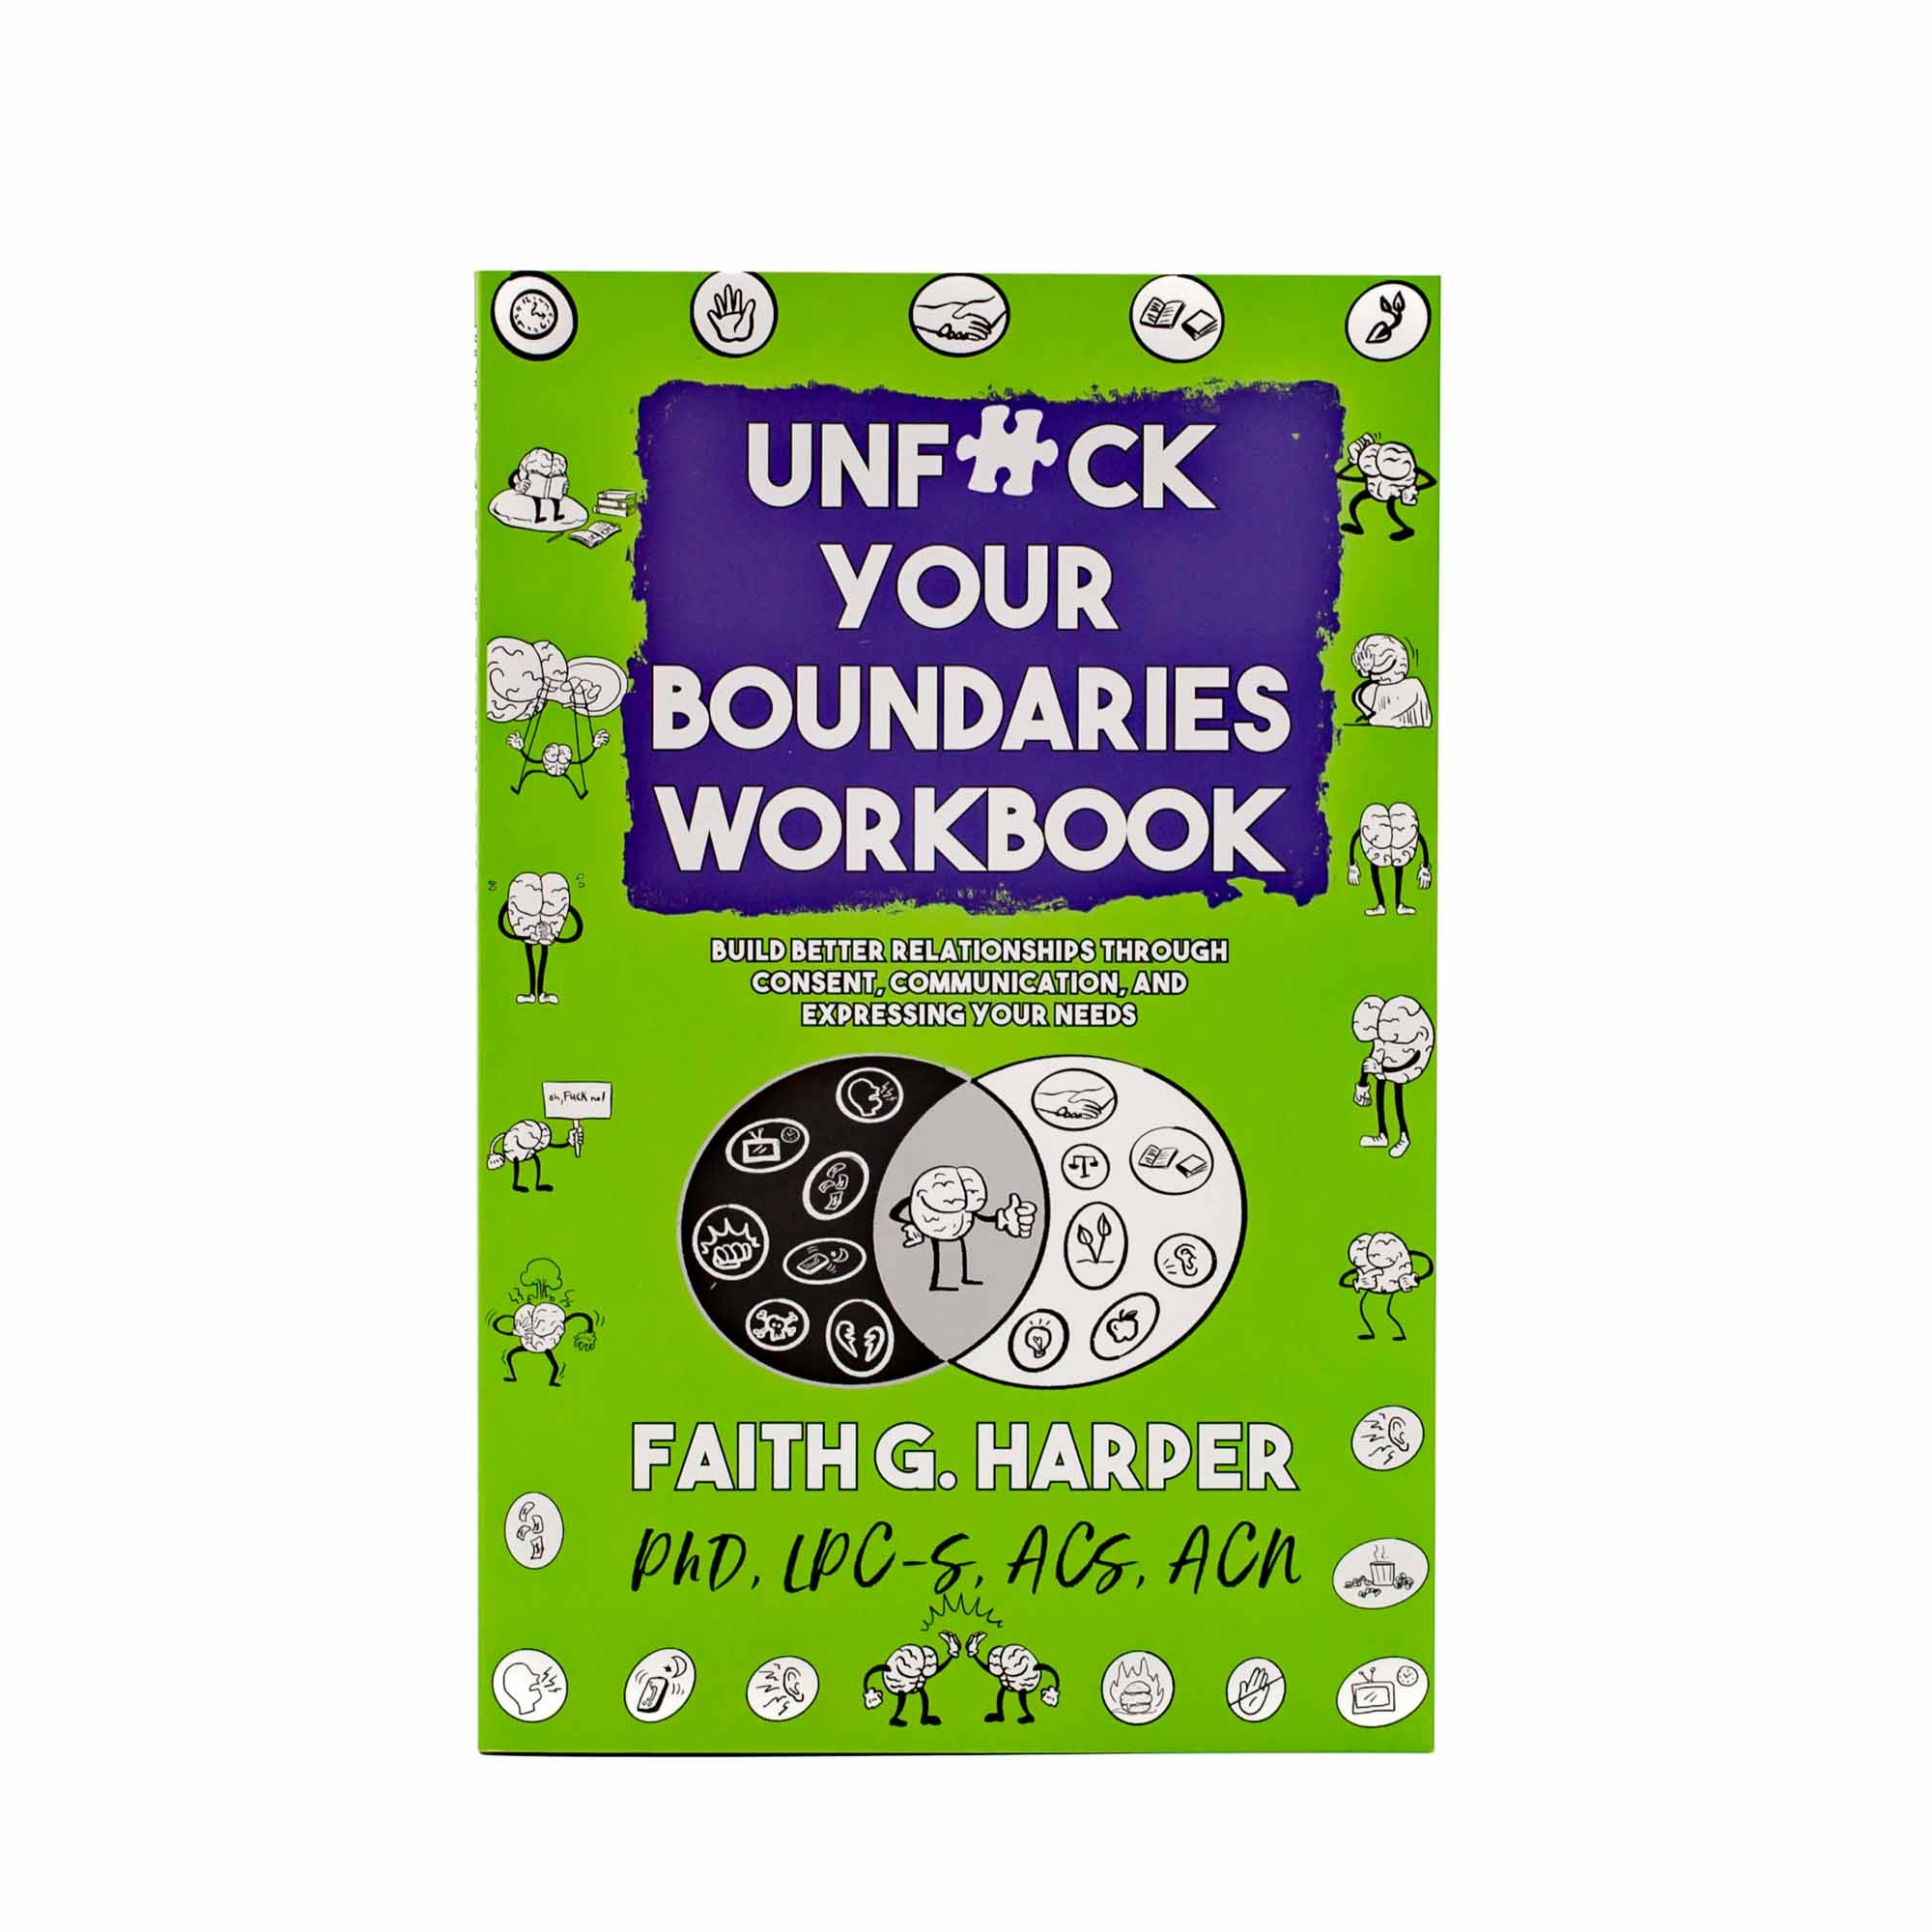 Unfuck Your Boundaries Workbook by Faith G. Harper - Mortise And Tenon